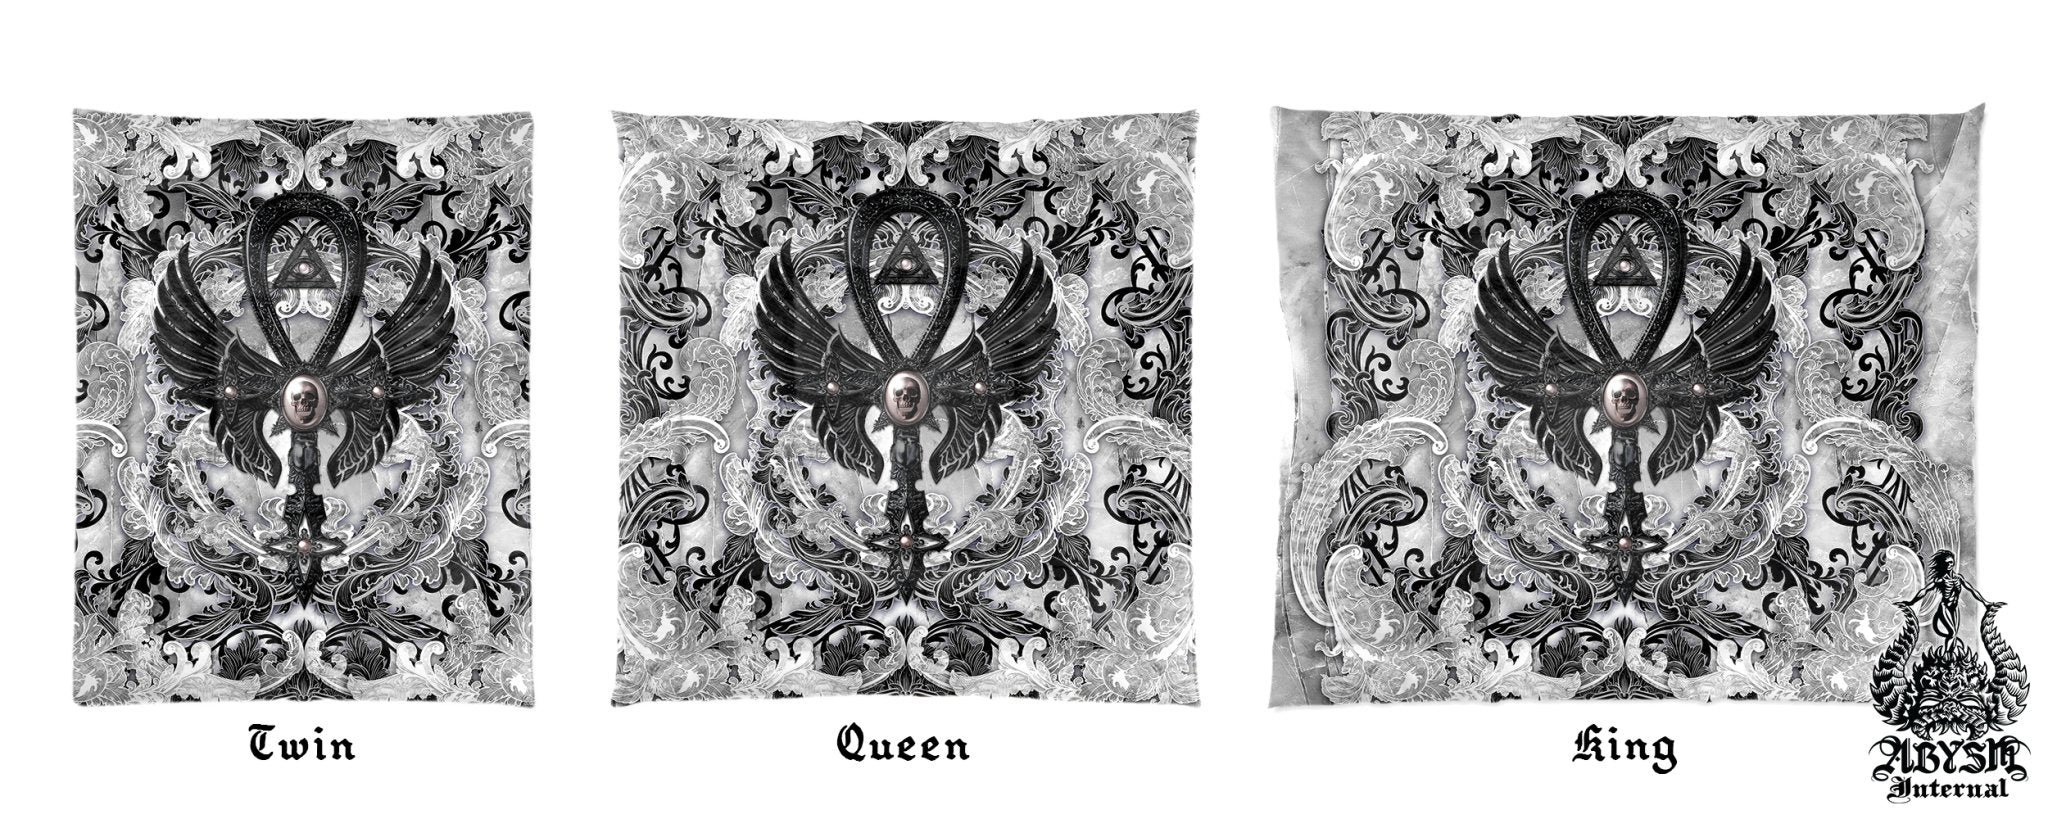 Black & White Goth Comforter or Duvet, Ankh Bed Cover, Gothic Bedroom Decor, King, Queen & Twin Bedding Set - Abysm Internal